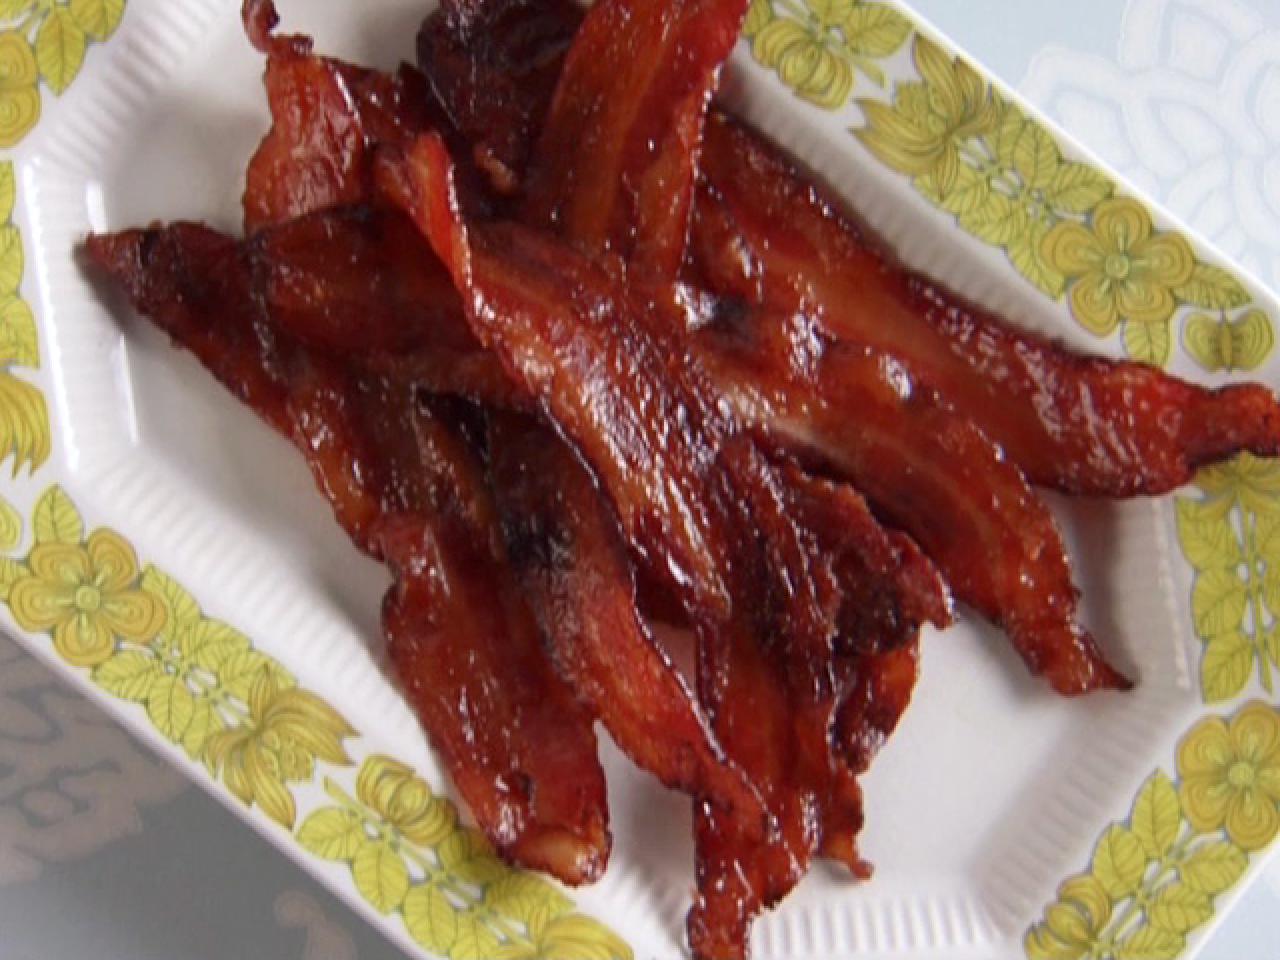 How to Cook Bacon: Food Network, Cooking School